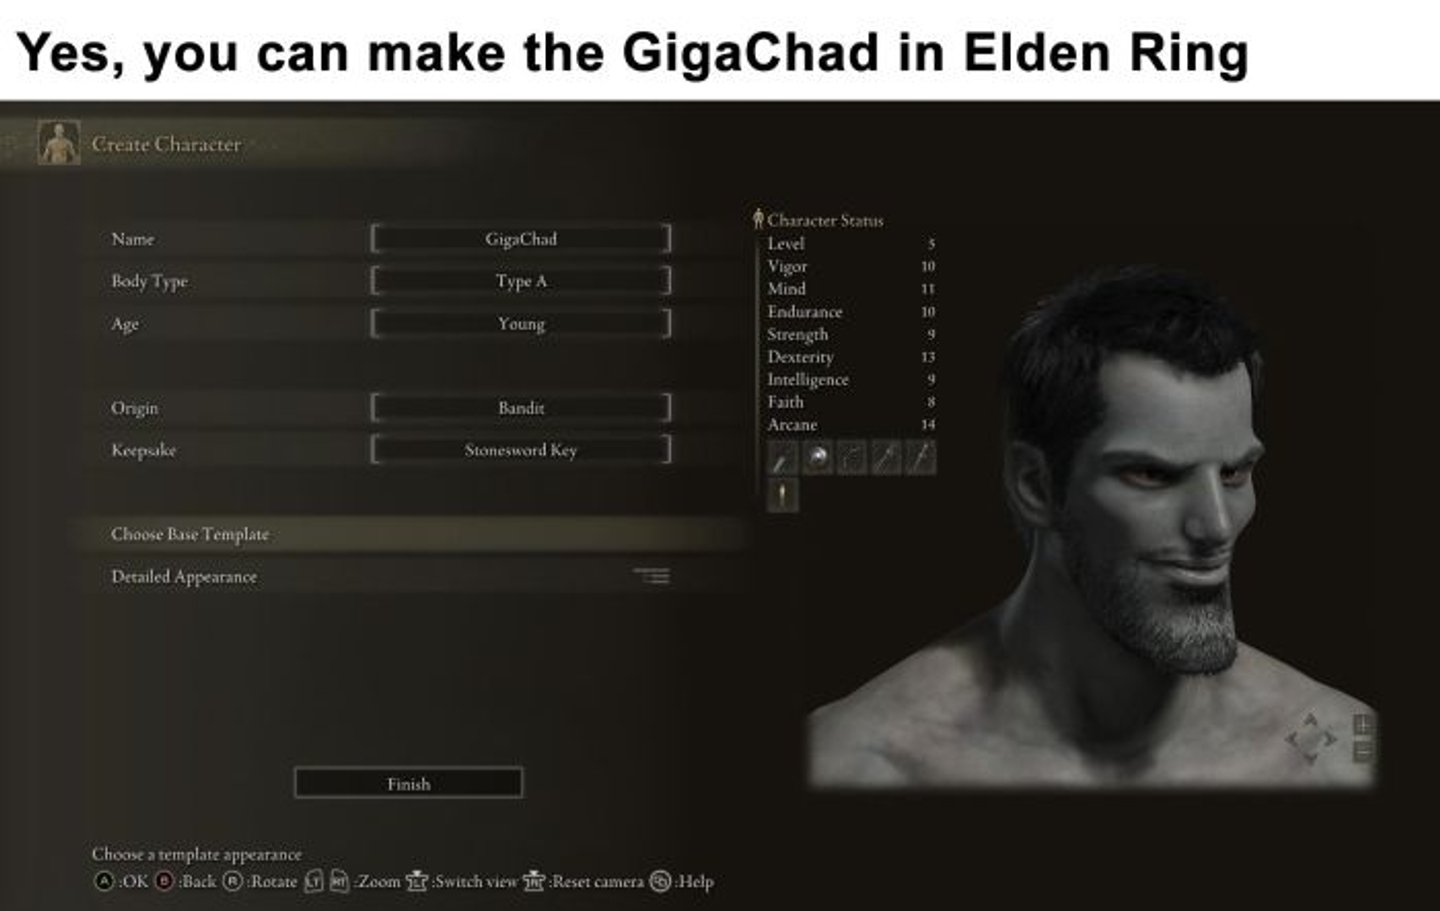 funny gaming memes - Elden Ring - Yes, you can make the GigaChad in Elden Ring Create Character Nam GigaChad Body Type Type A 10 11 10 Age Young Character Status Level Vigor Mind Endurance Strength Dexterity Intelligence Faith Arcane 13 q Bandit Ongin 8 K